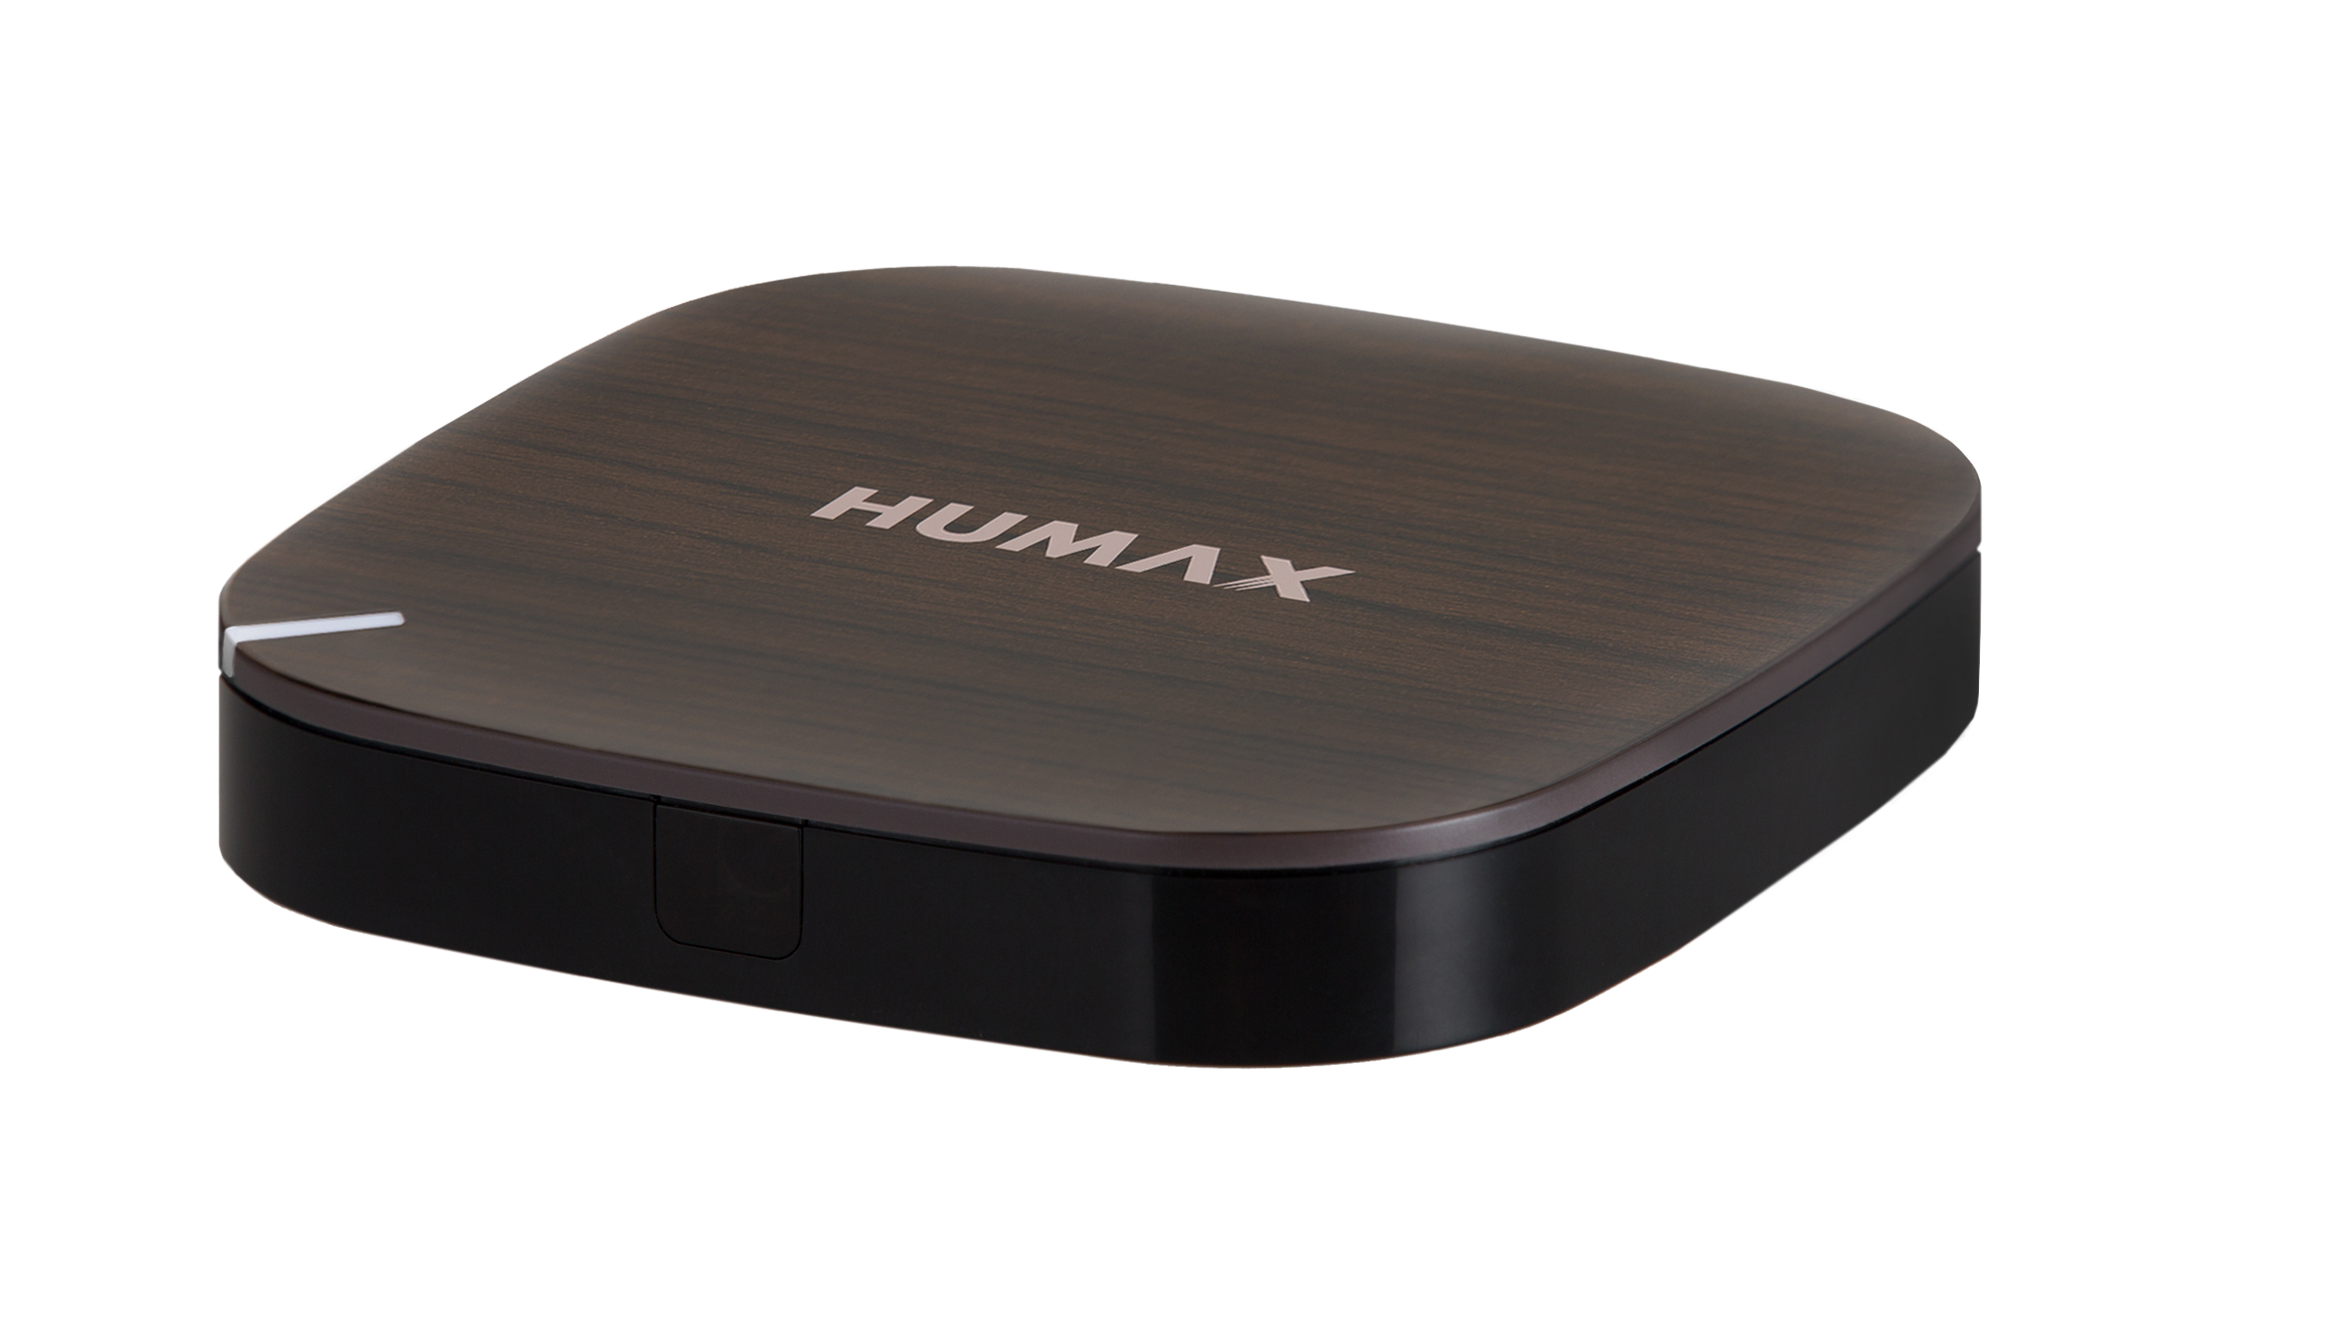 humax h3 espresso media player provides aerial free tv viewing image 1